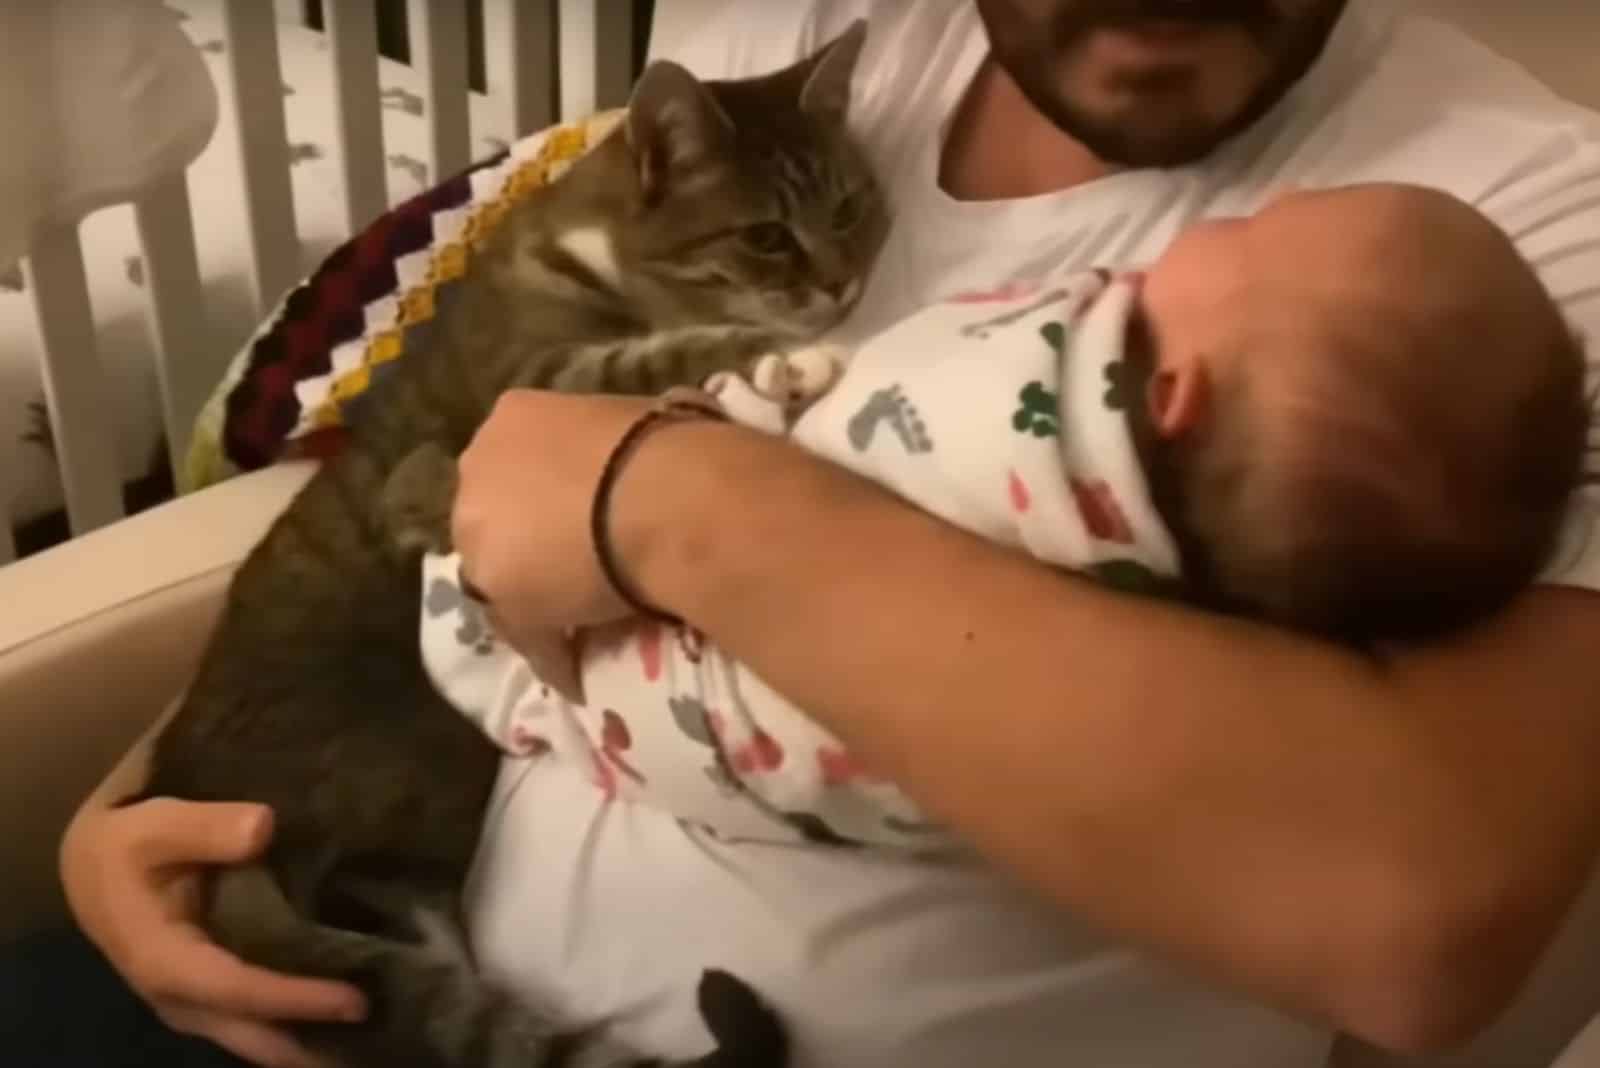 man holding cat and baby in arms